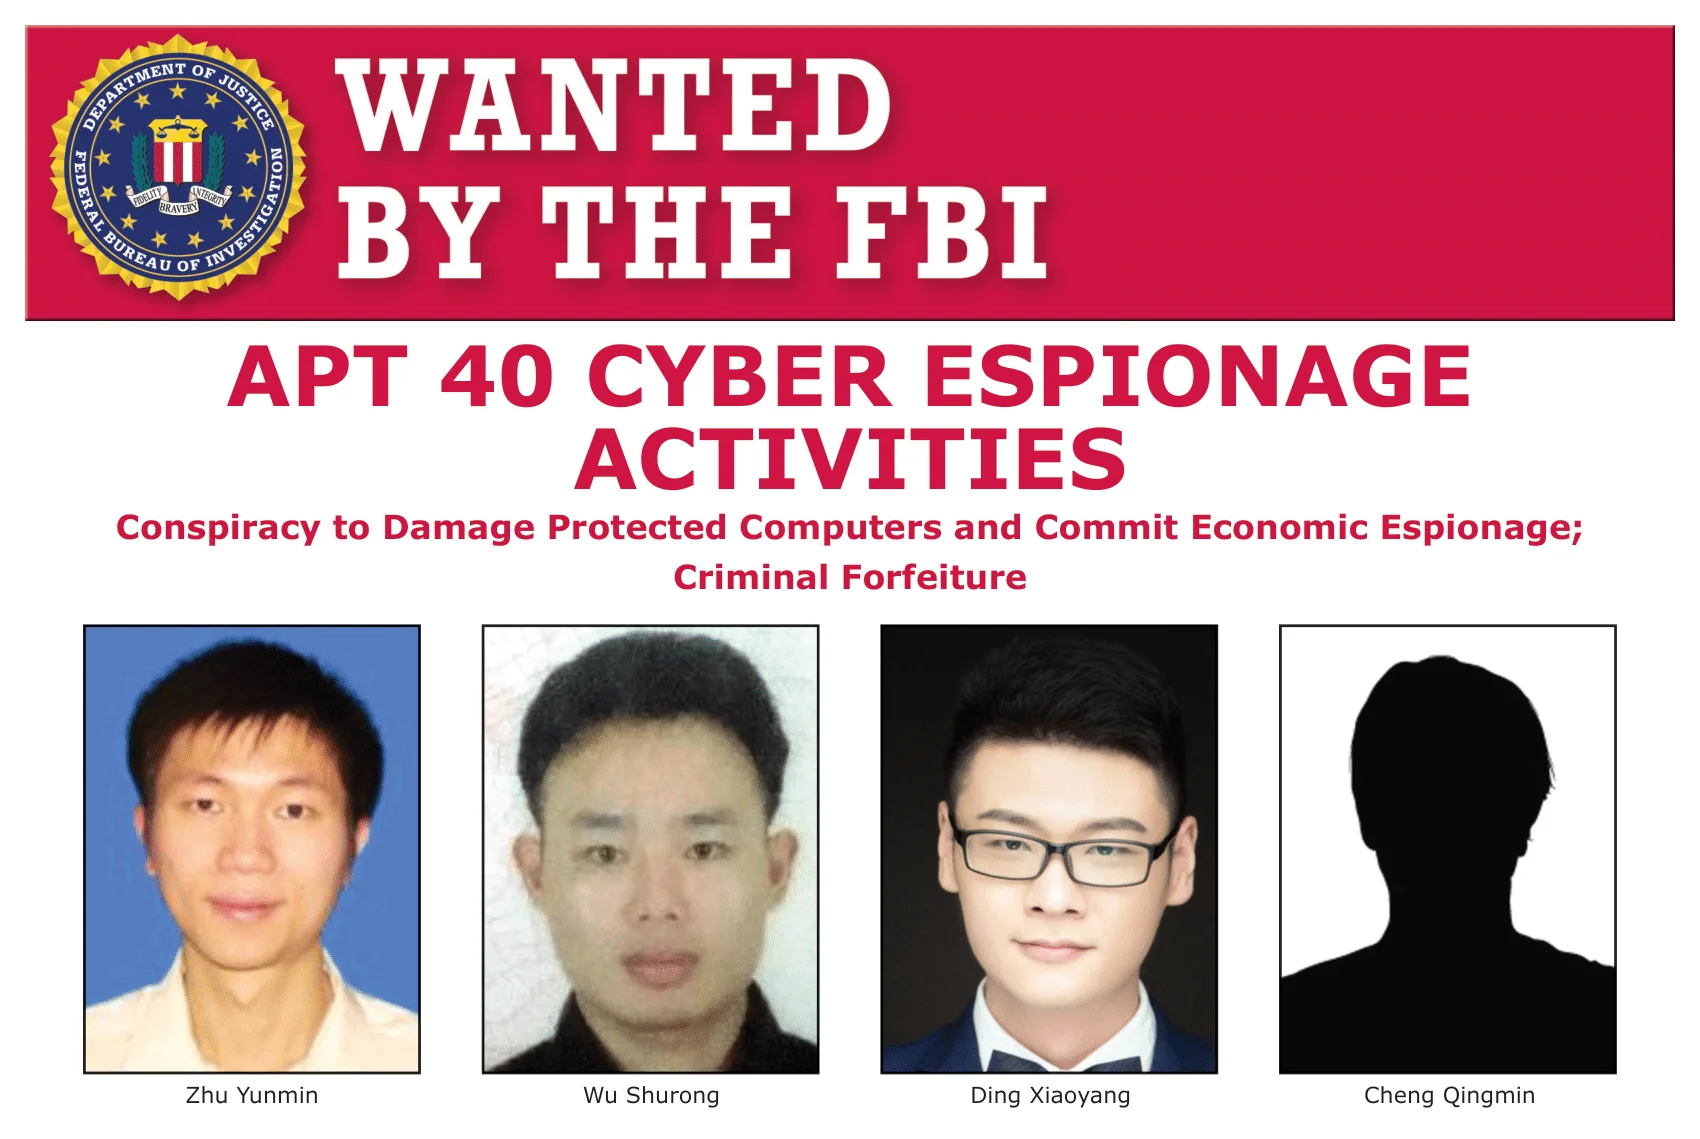 APT40: Wanted by the FBI - Source: FBI